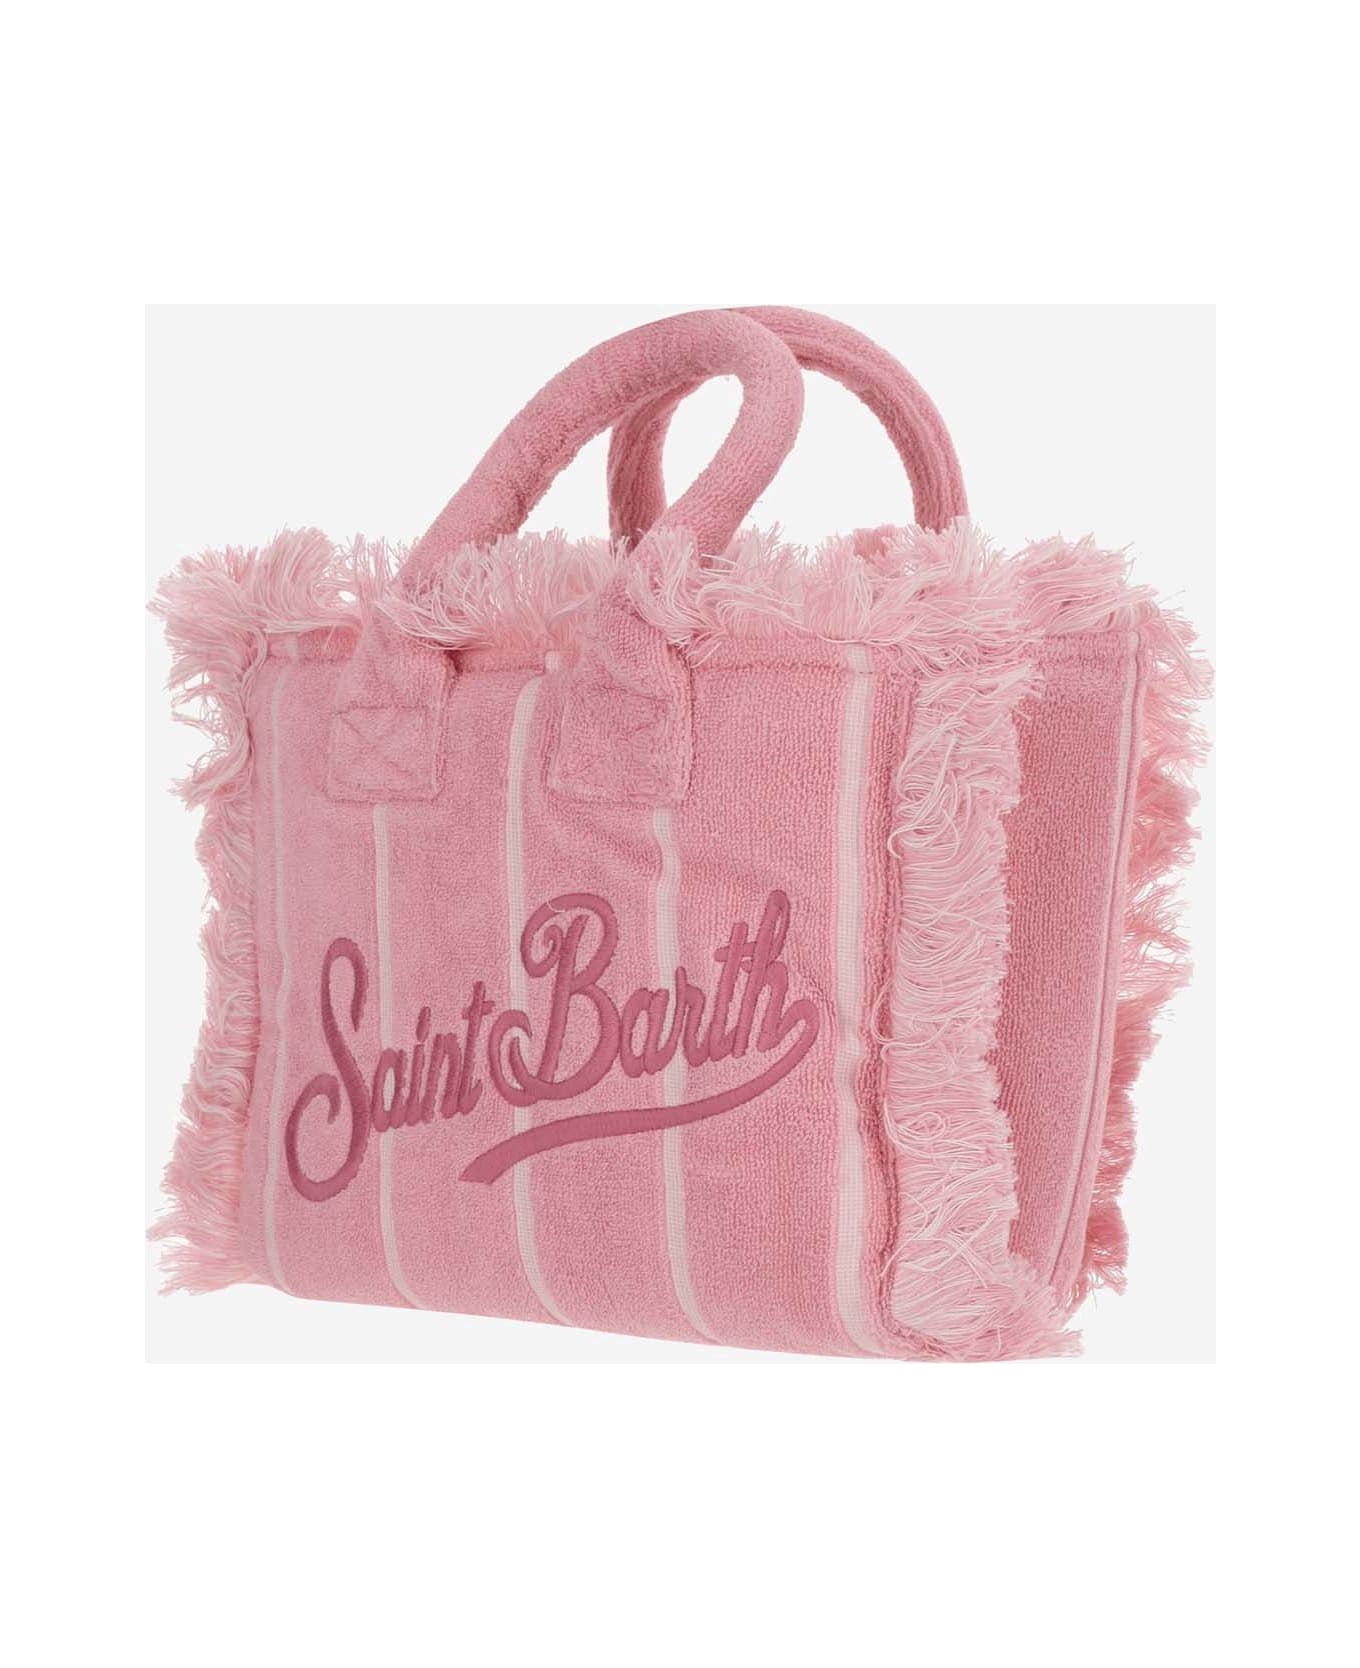 MC2 Saint Barth Colette Terry Cloth Tote Bag With Embroidery - Pink